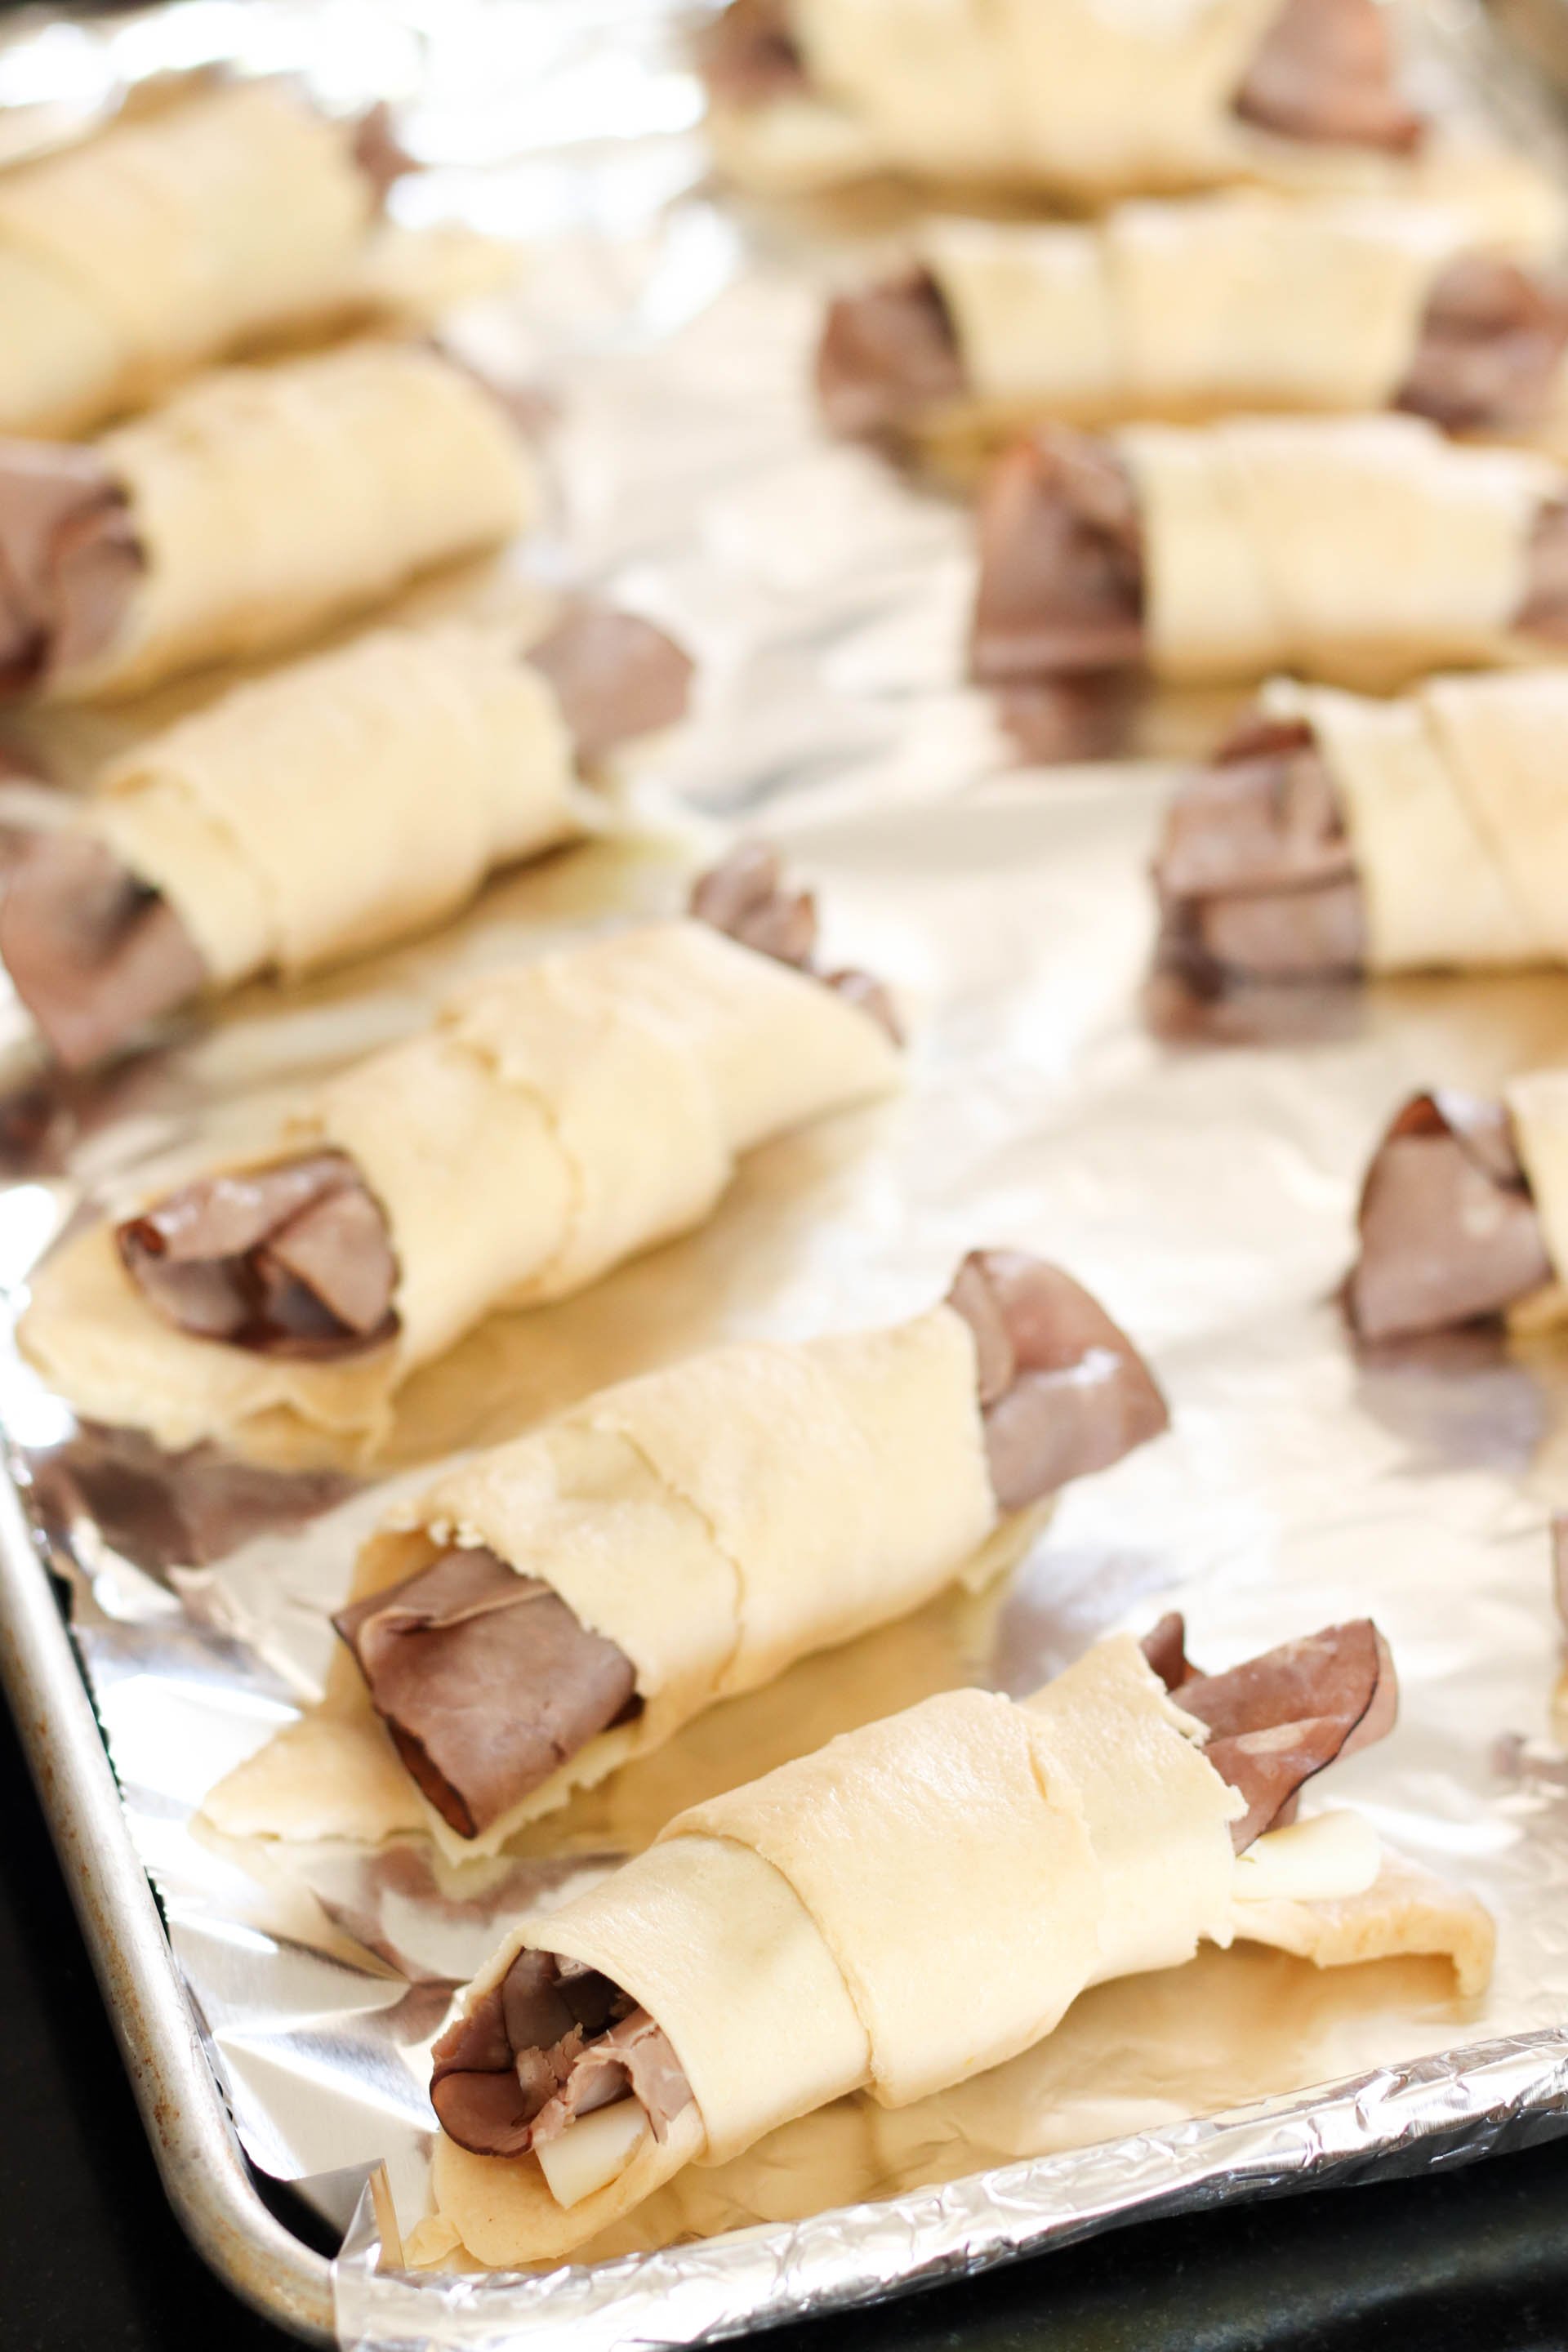 Rolled up crescents with meat and cheese inside, waiting to be cooked